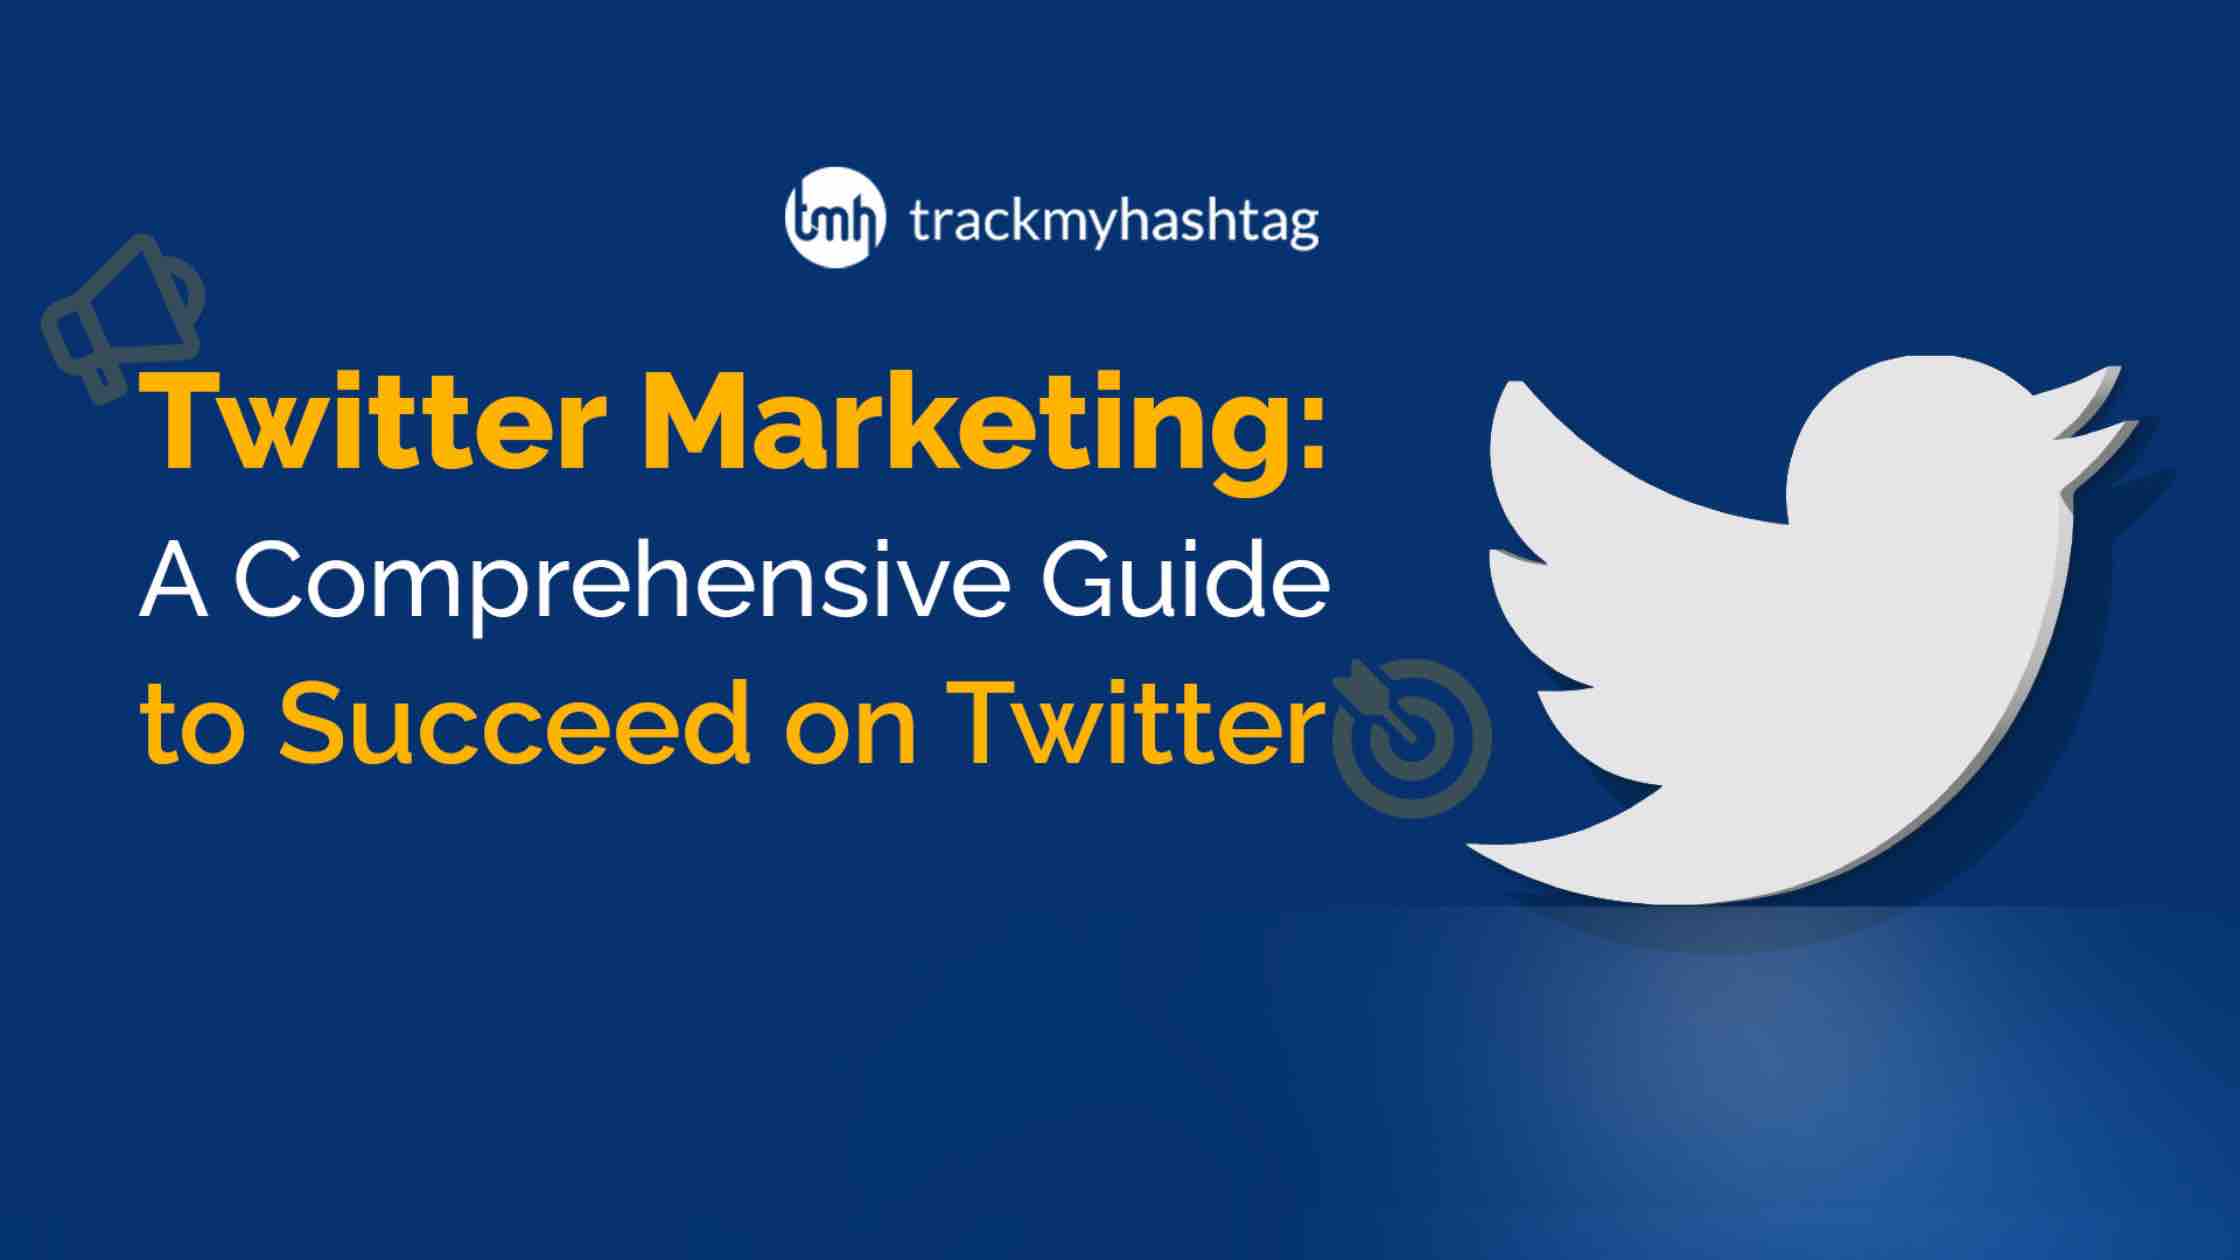 Twitter Marketing: A Comprehensive Guide to Succeed on Twitter